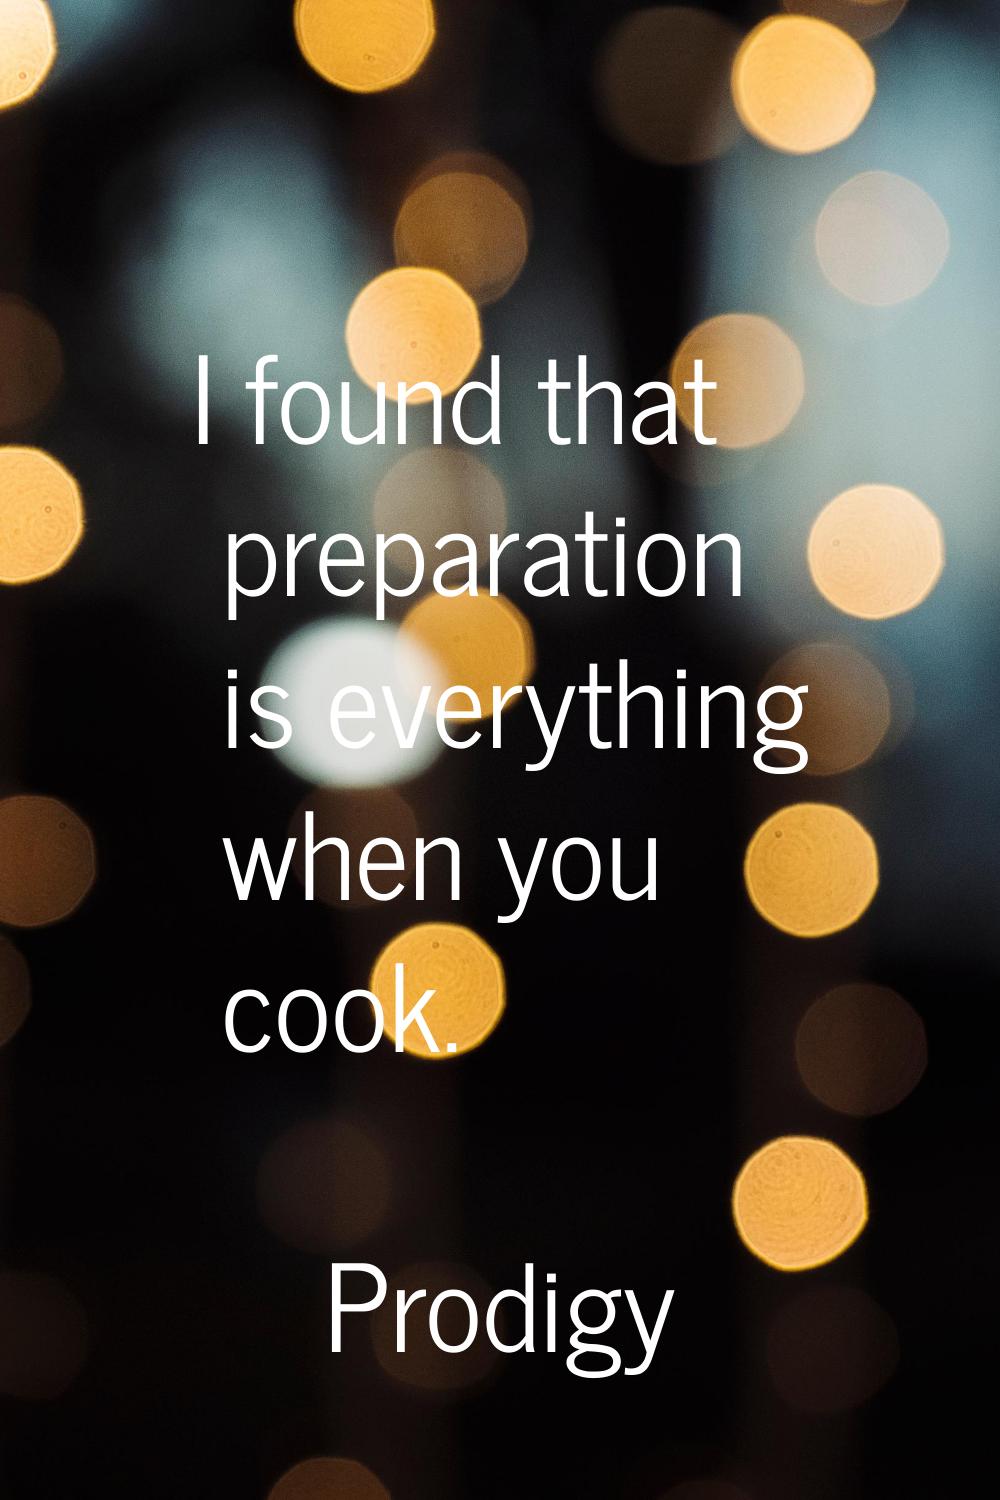 I found that preparation is everything when you cook.